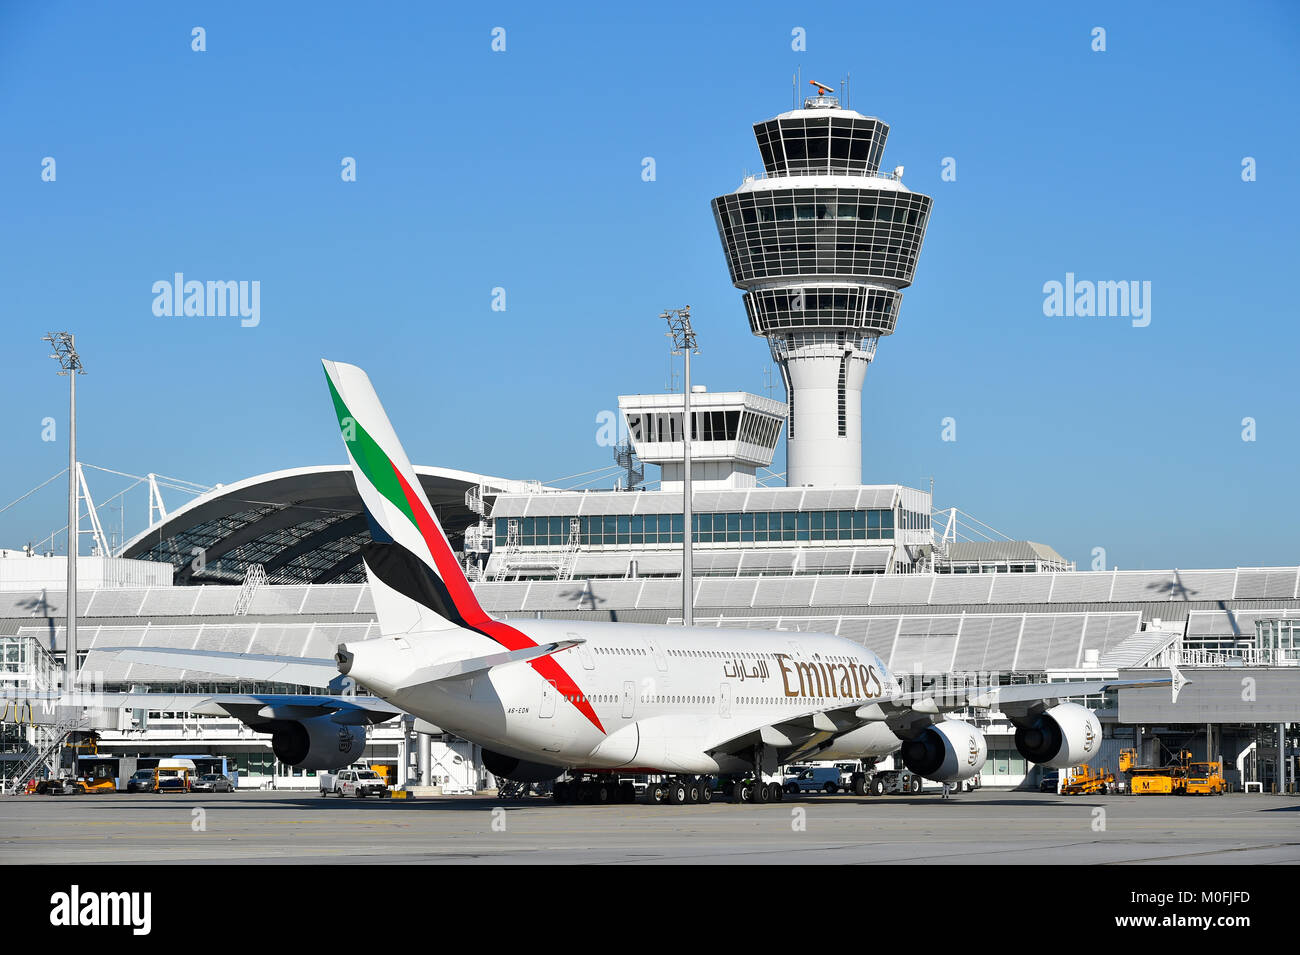 Emirates, Airbus, A380-800, A380, 800, Airplane, Aircraft, Plane, Munich Airport, terminal 1, tower, position, ramp, Stock Photo